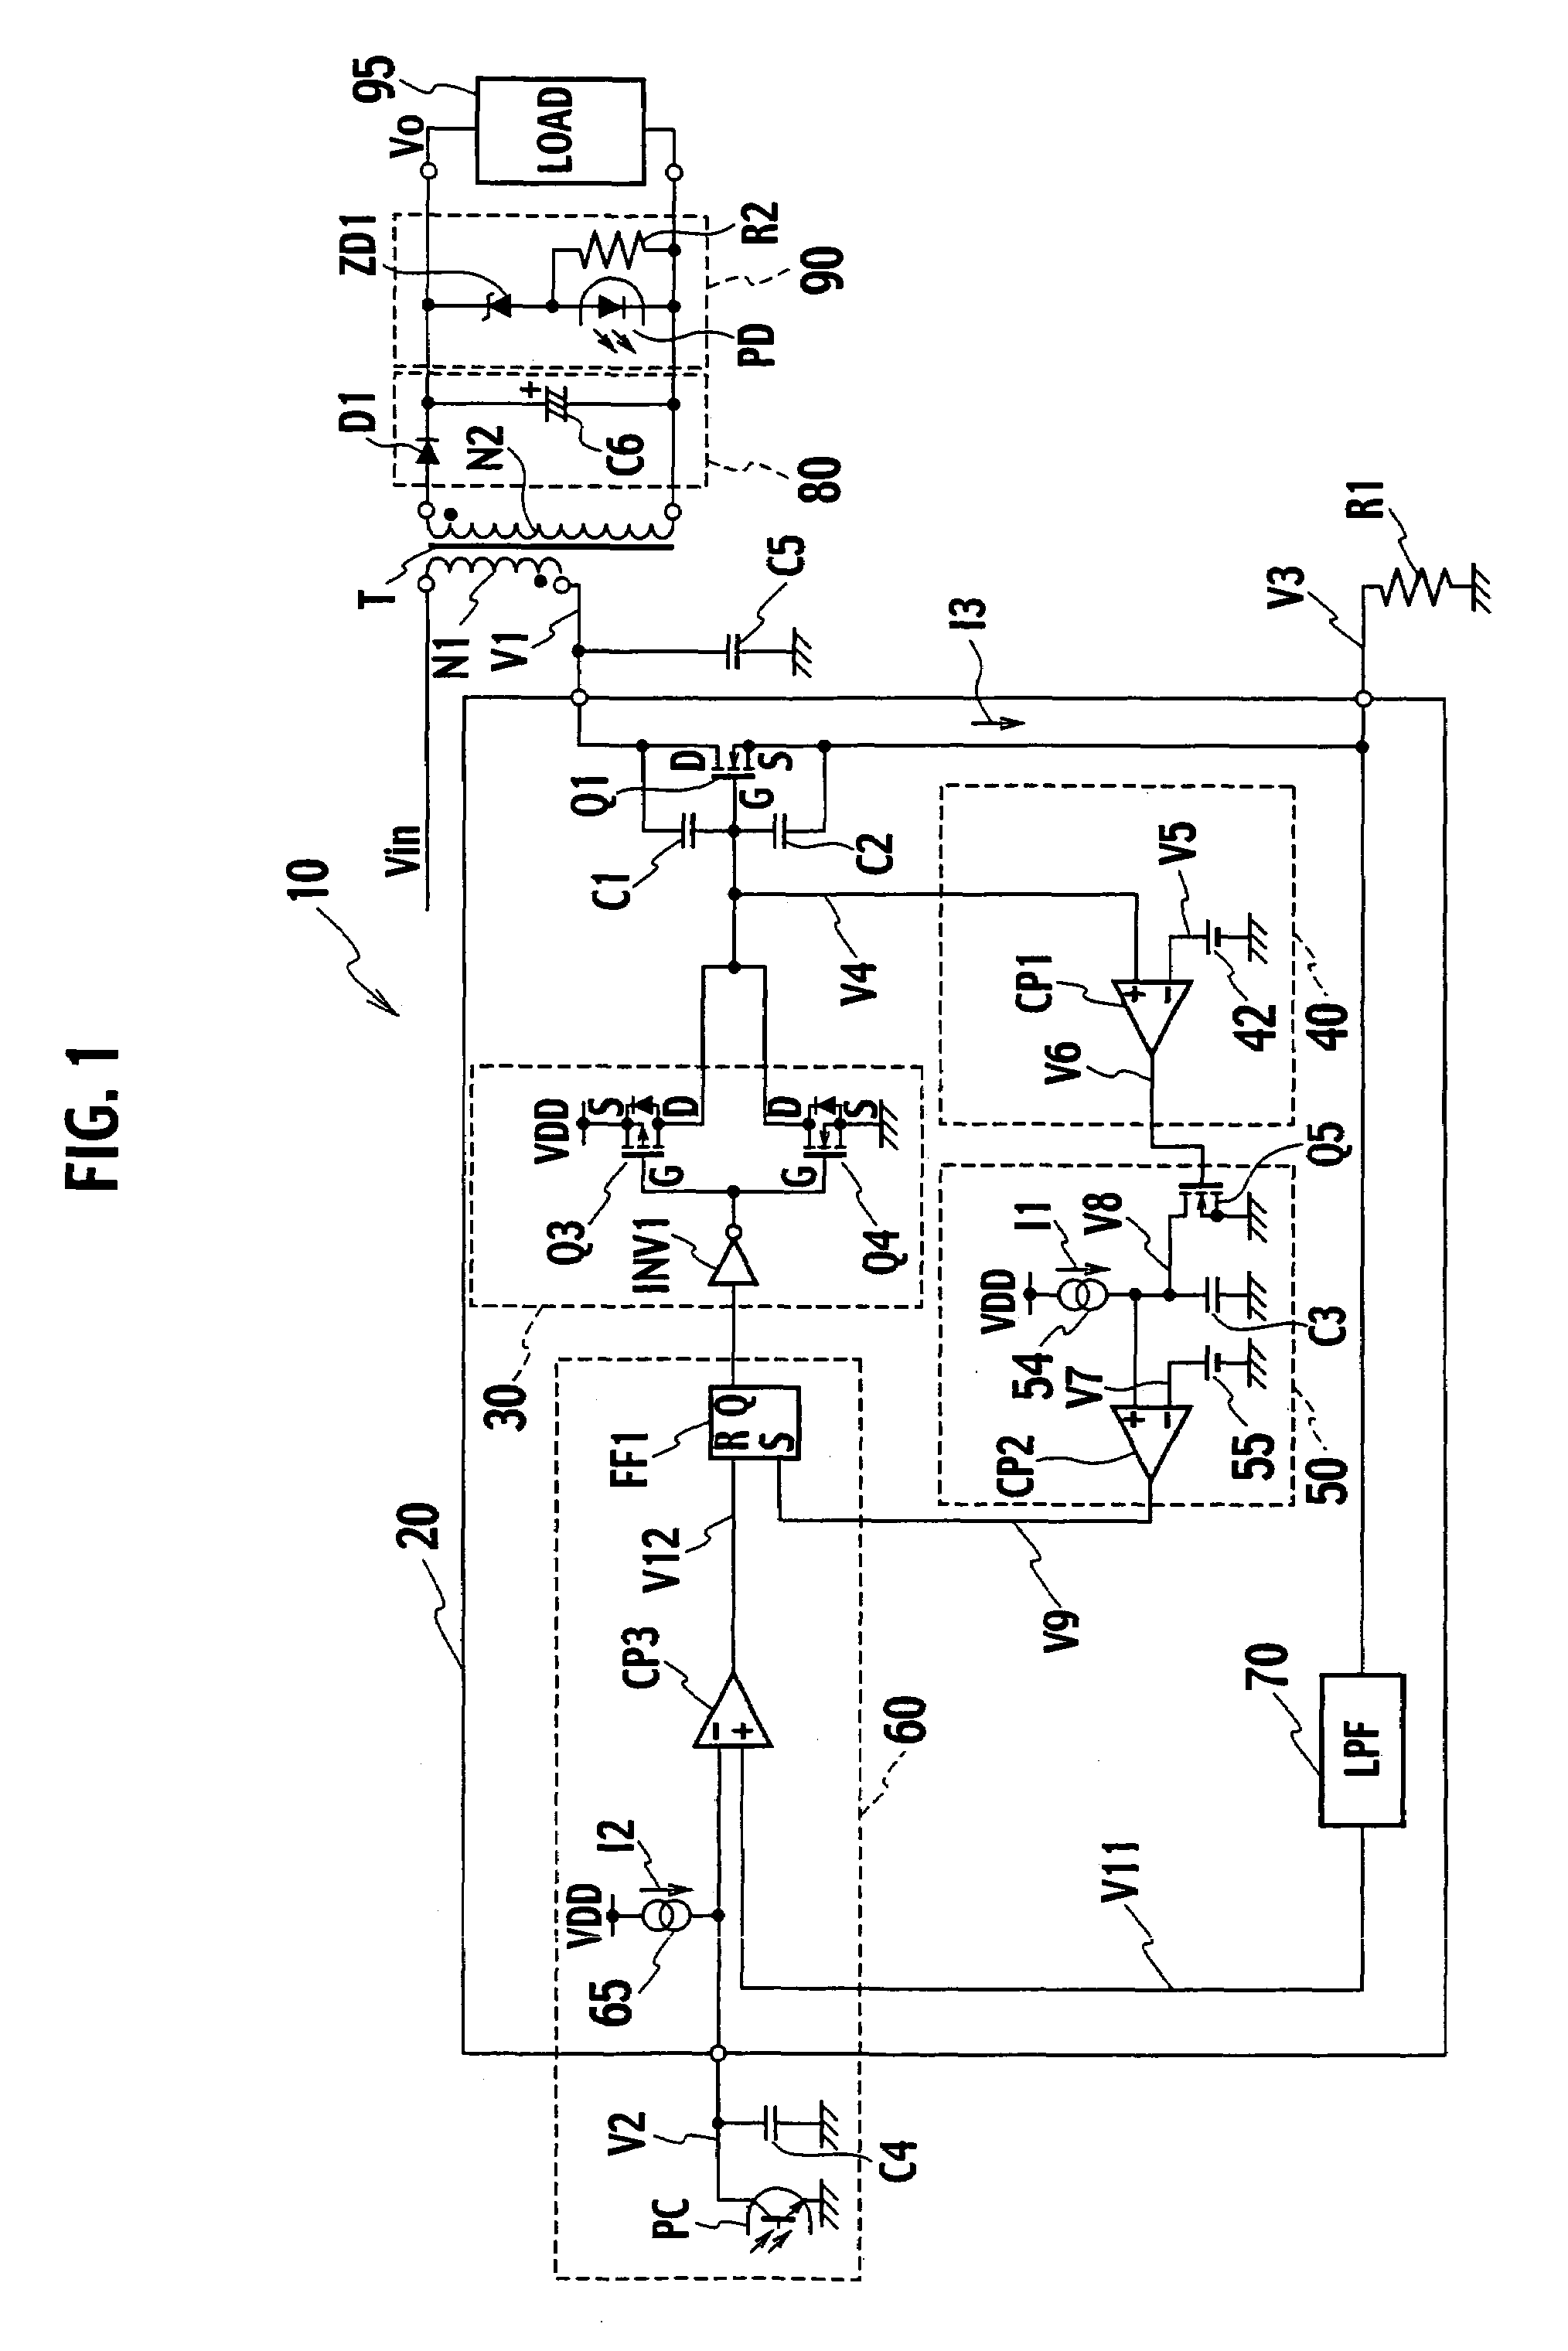 Switching power source apparatus with voltage gate detector for the switch